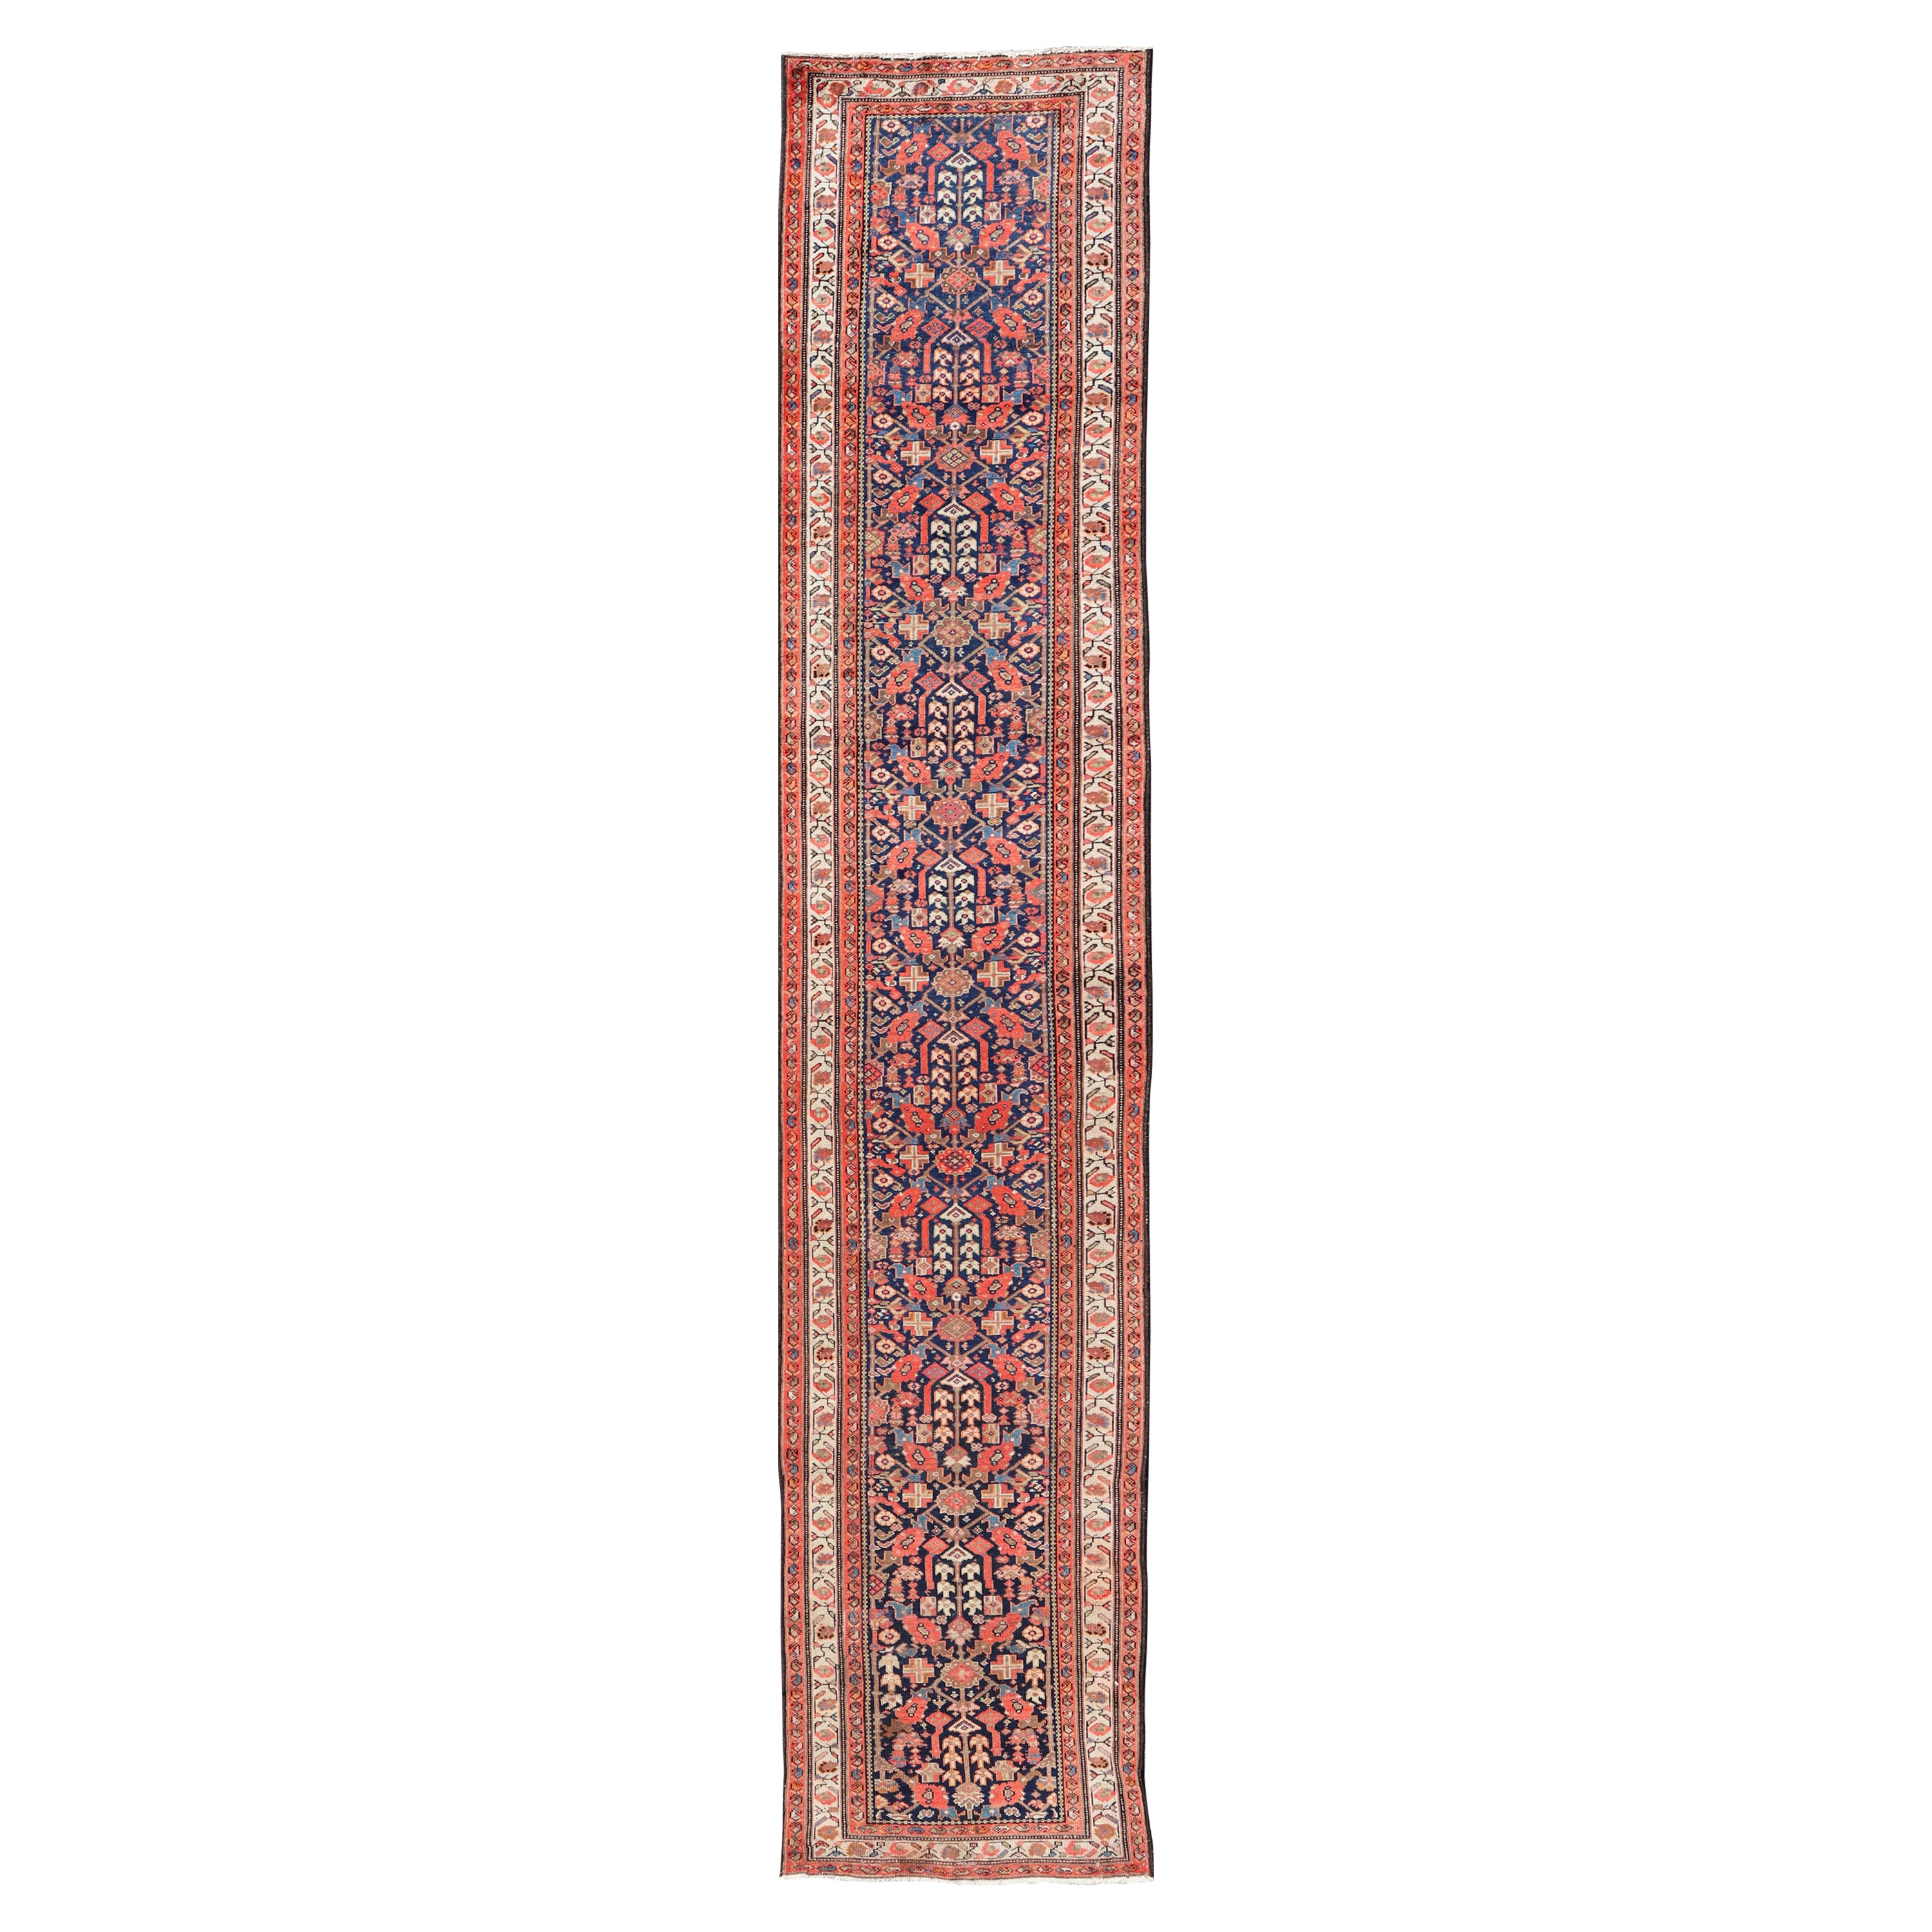 Antique Malayer Long Runner in Orange, Blue and Brown